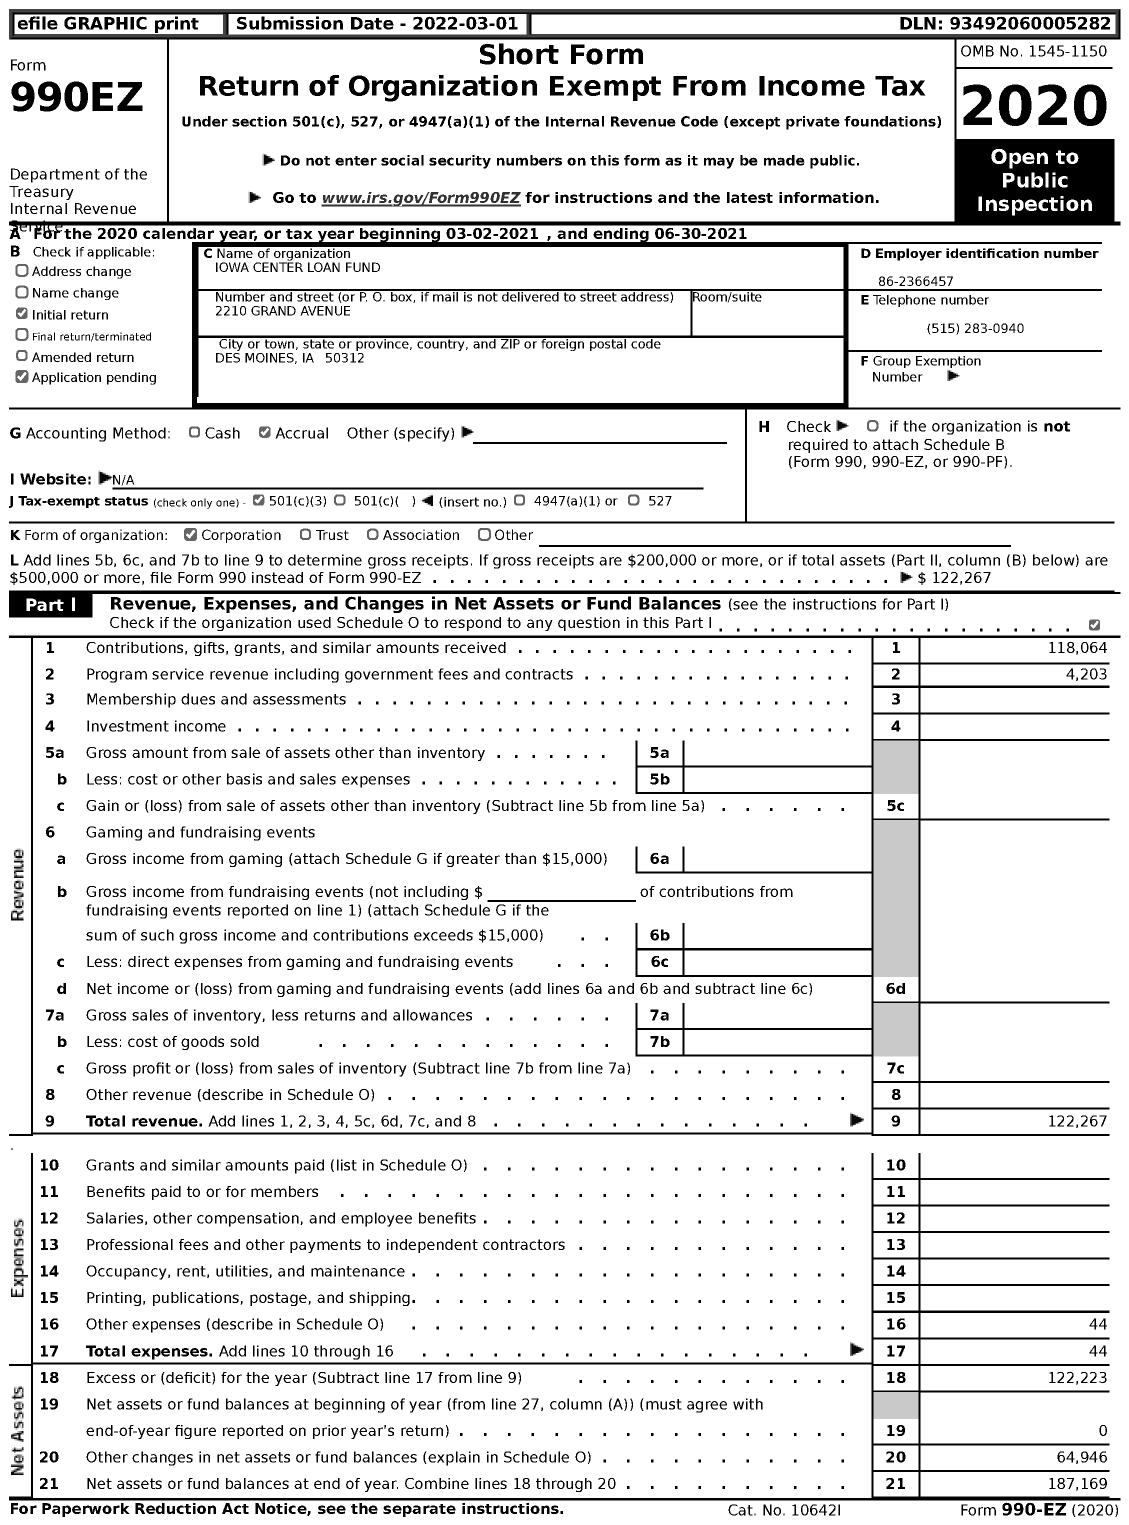 Image of first page of 2020 Form 990EZ for Iowa Center Loan Fund